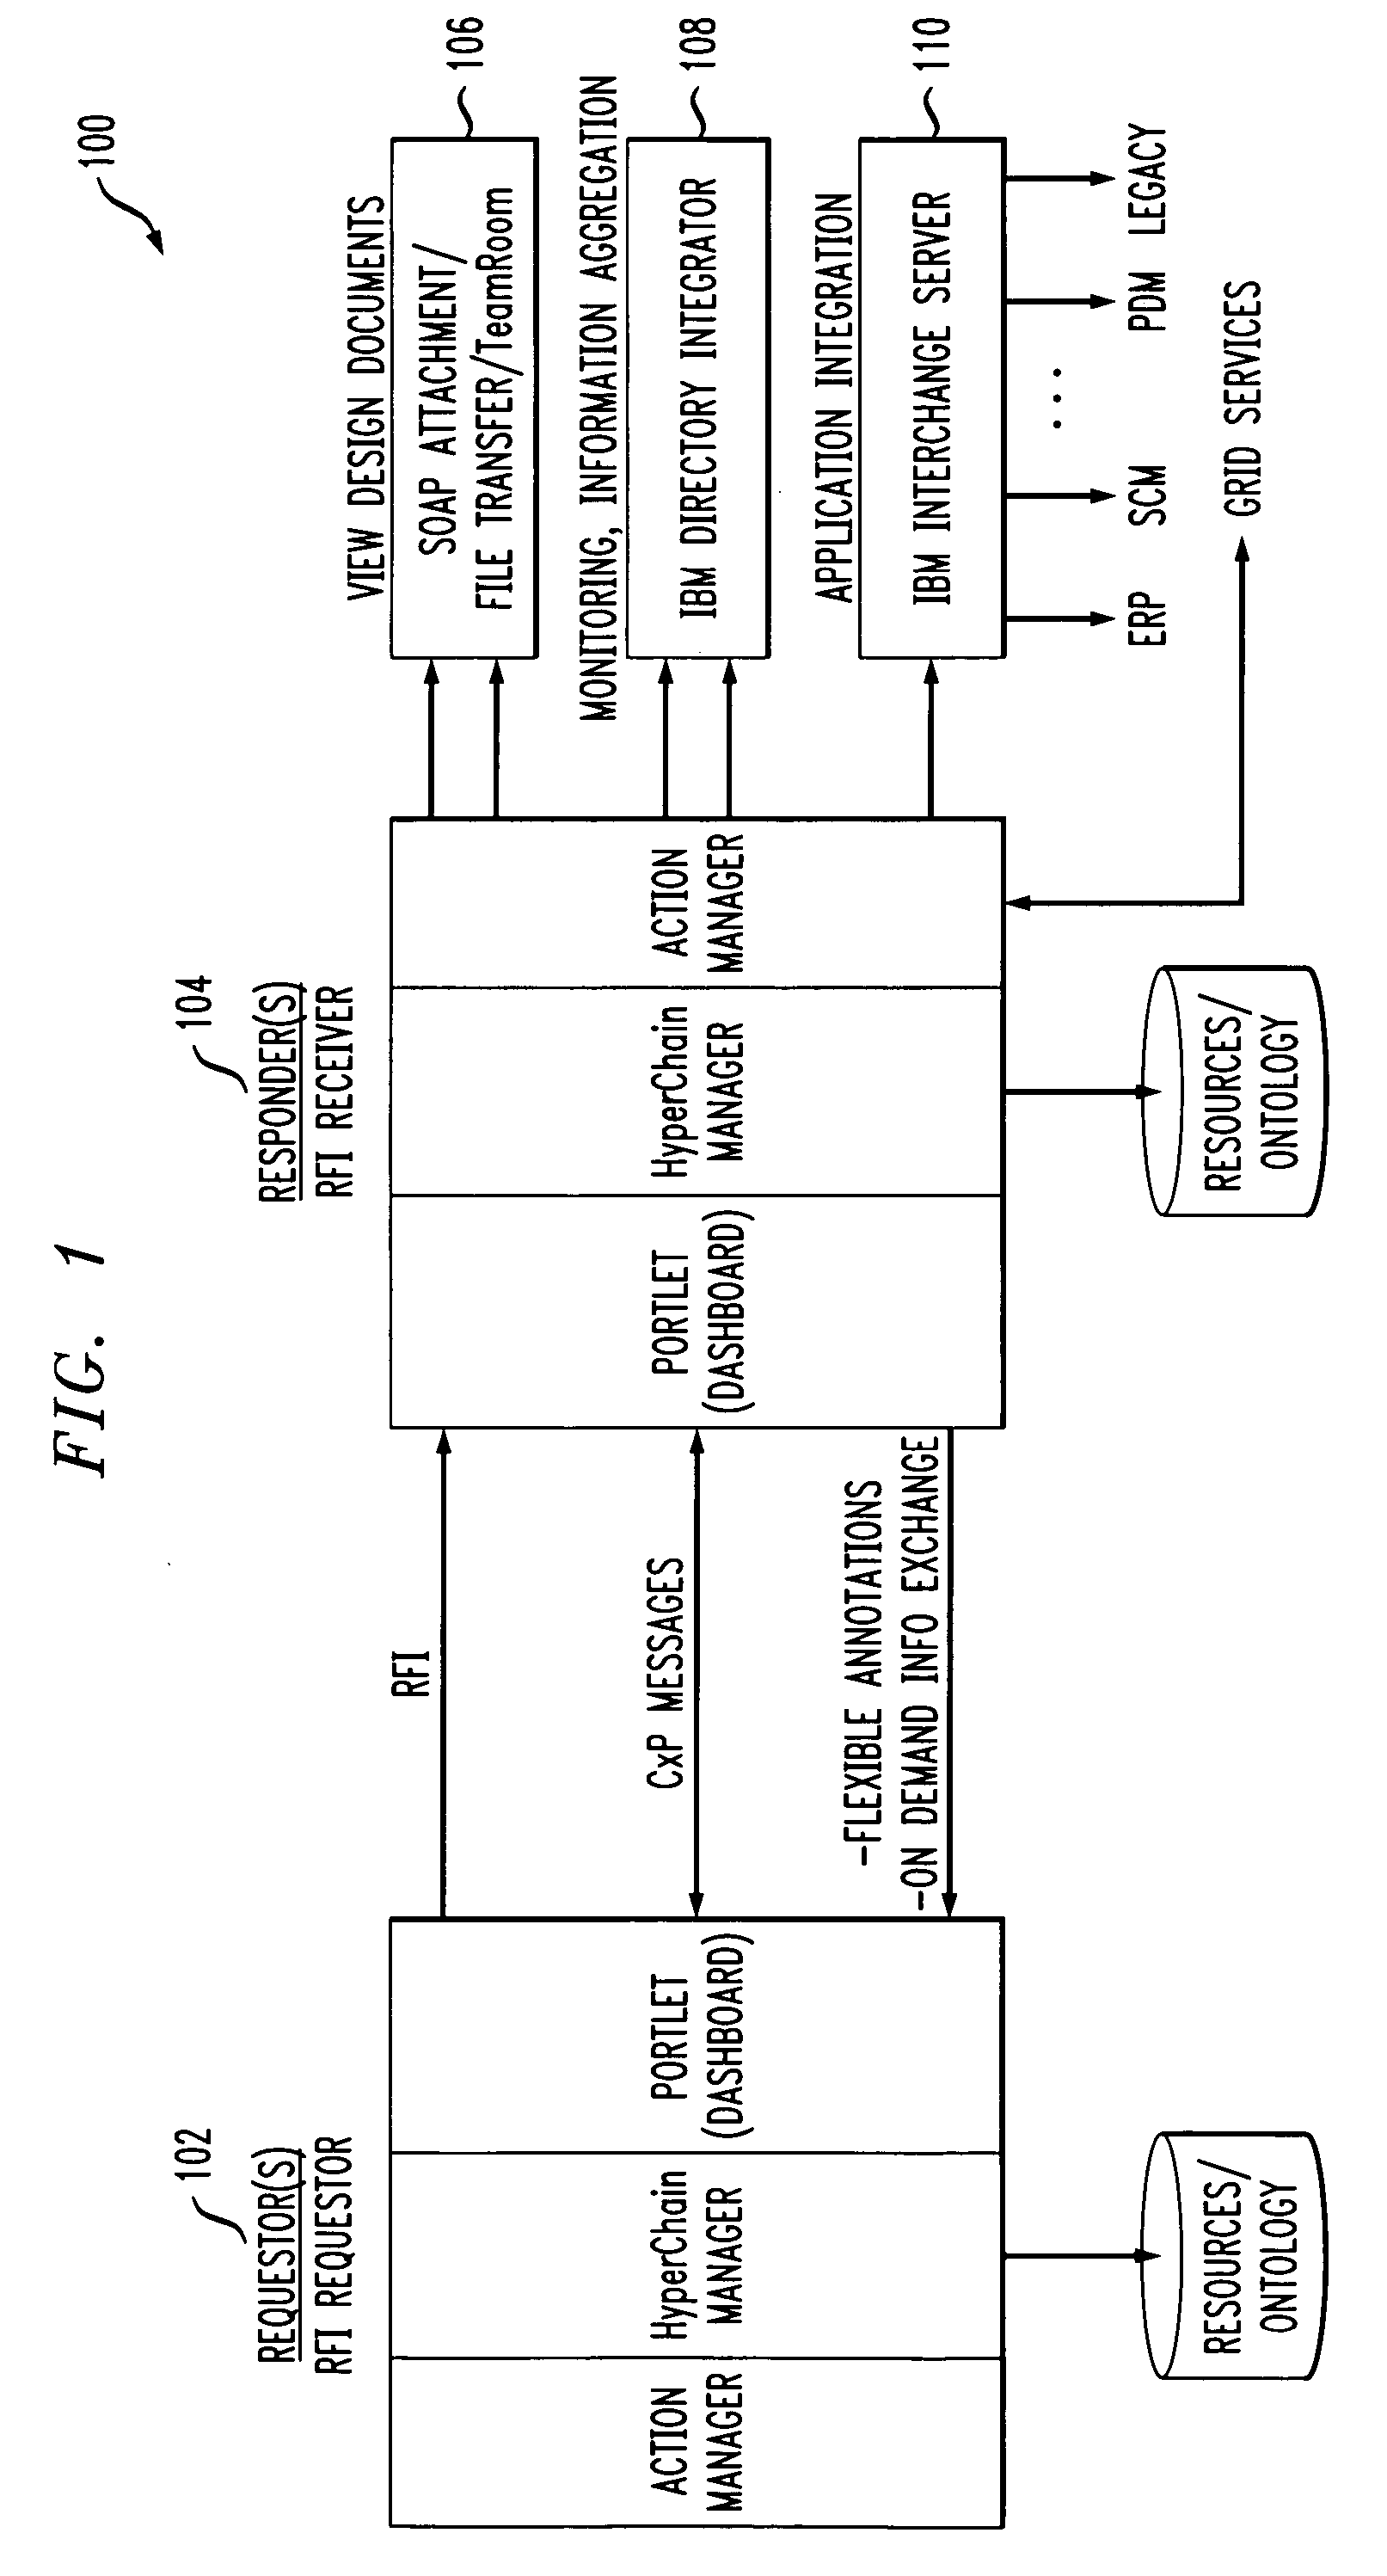 Method and apparatus for creating and customizing plug-in business collaboration protocols